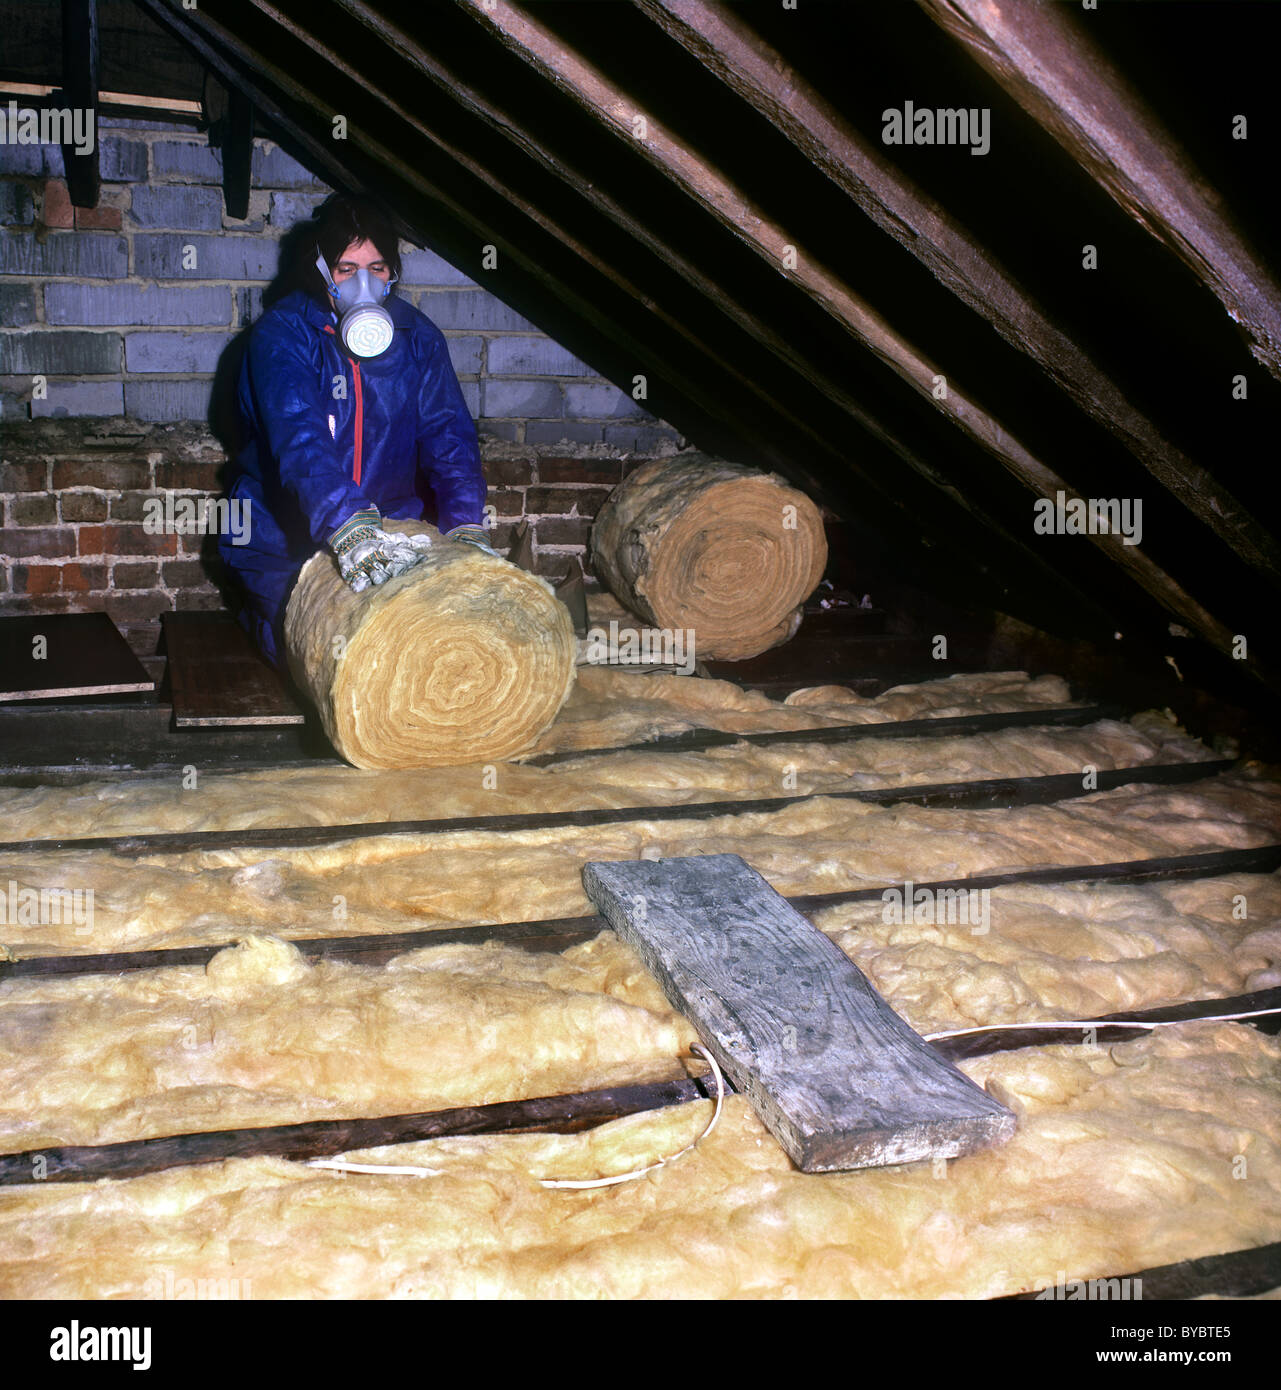 Woman (with protective clothing, gloves and mask) laying insulation material in an old house loft. Stock Photo